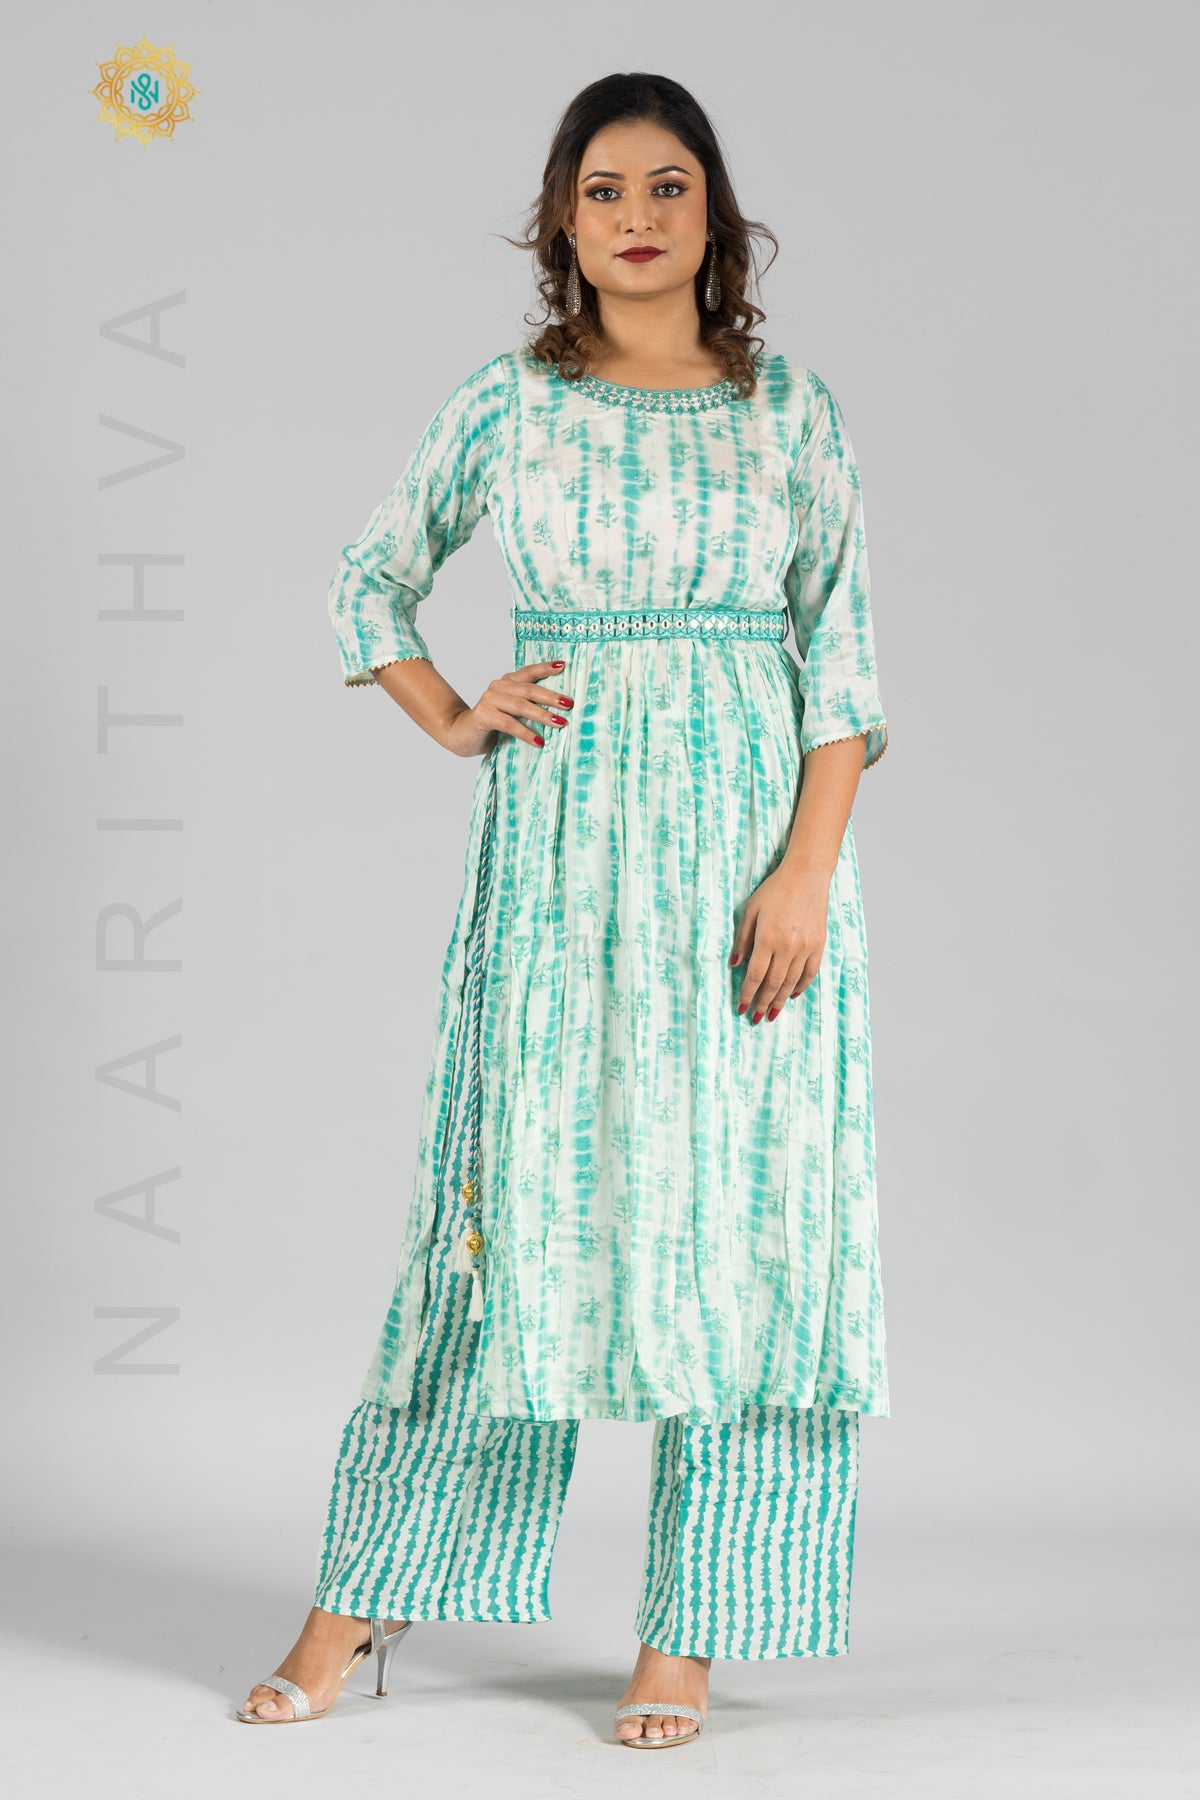 GREEN & WHITE - PARTY WEAR NAYRA CUT SALWAR SUIT WITH PARALLEL CUT PANT & DUPATTA